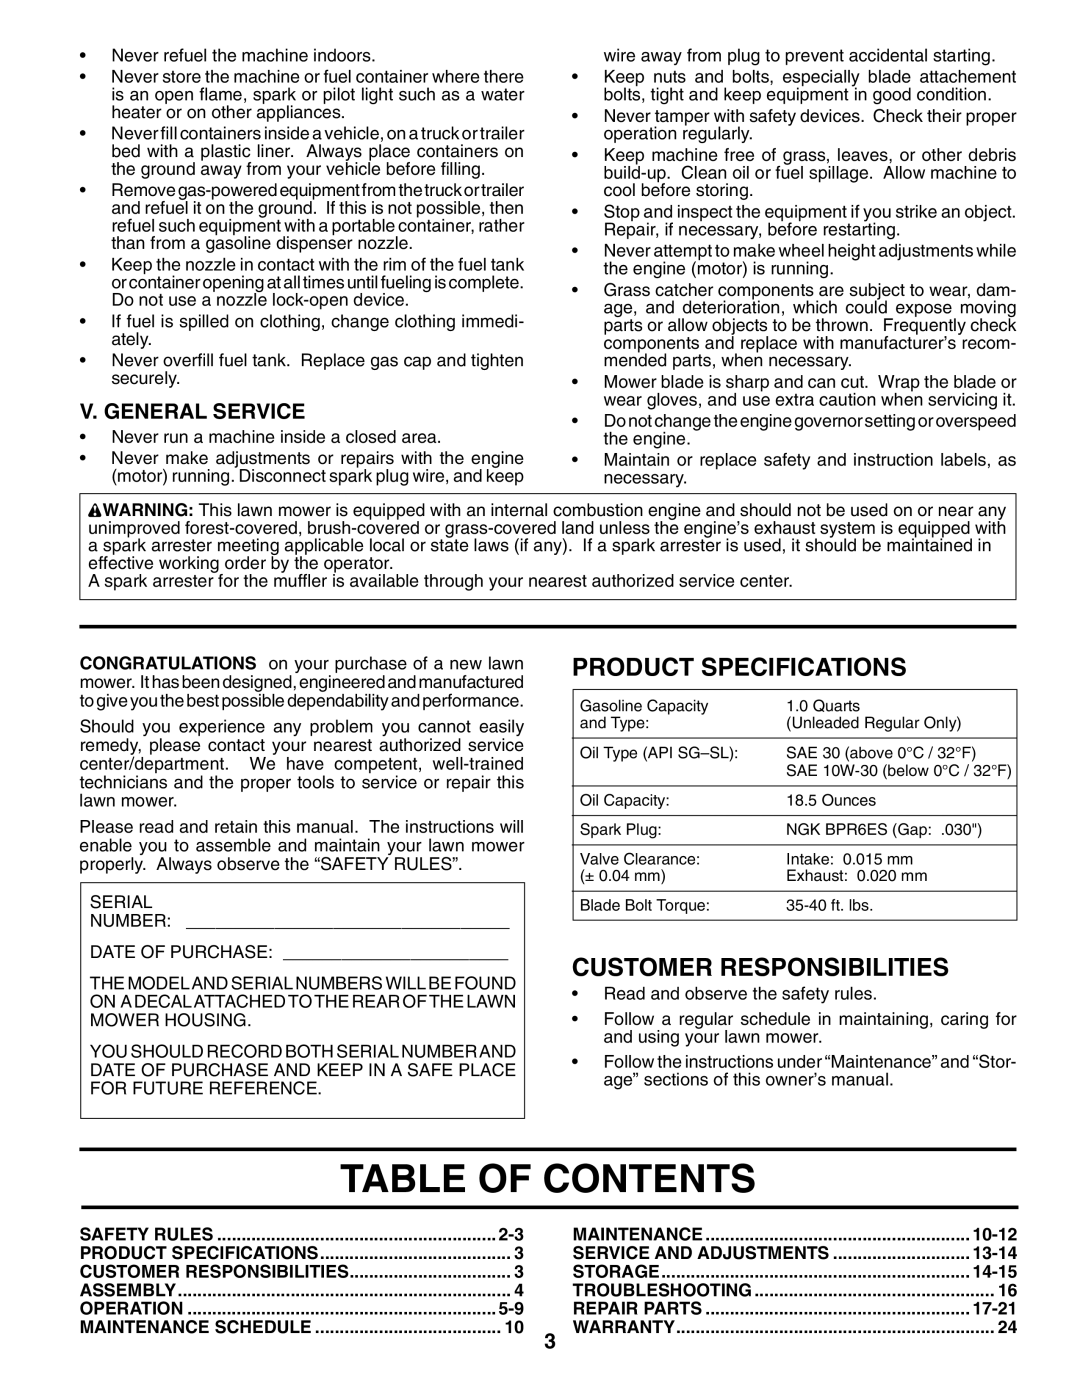 Husqvarna 5521RSX owner manual Table of Contents 